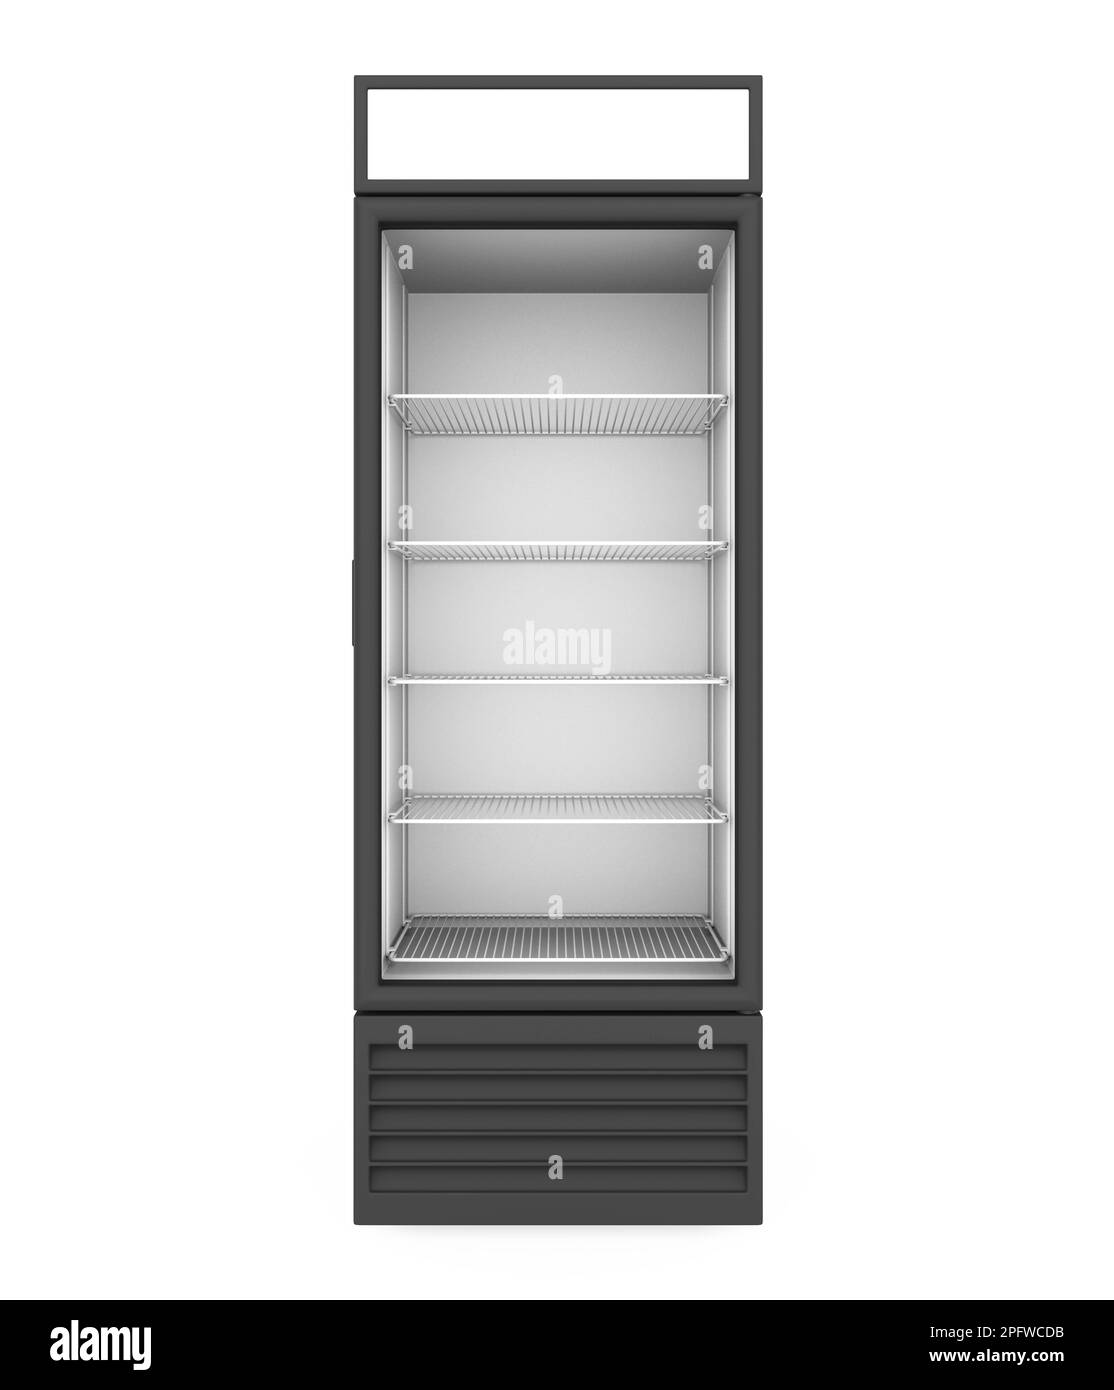 Commercial Display Refrigerator Isolated Stock Photo